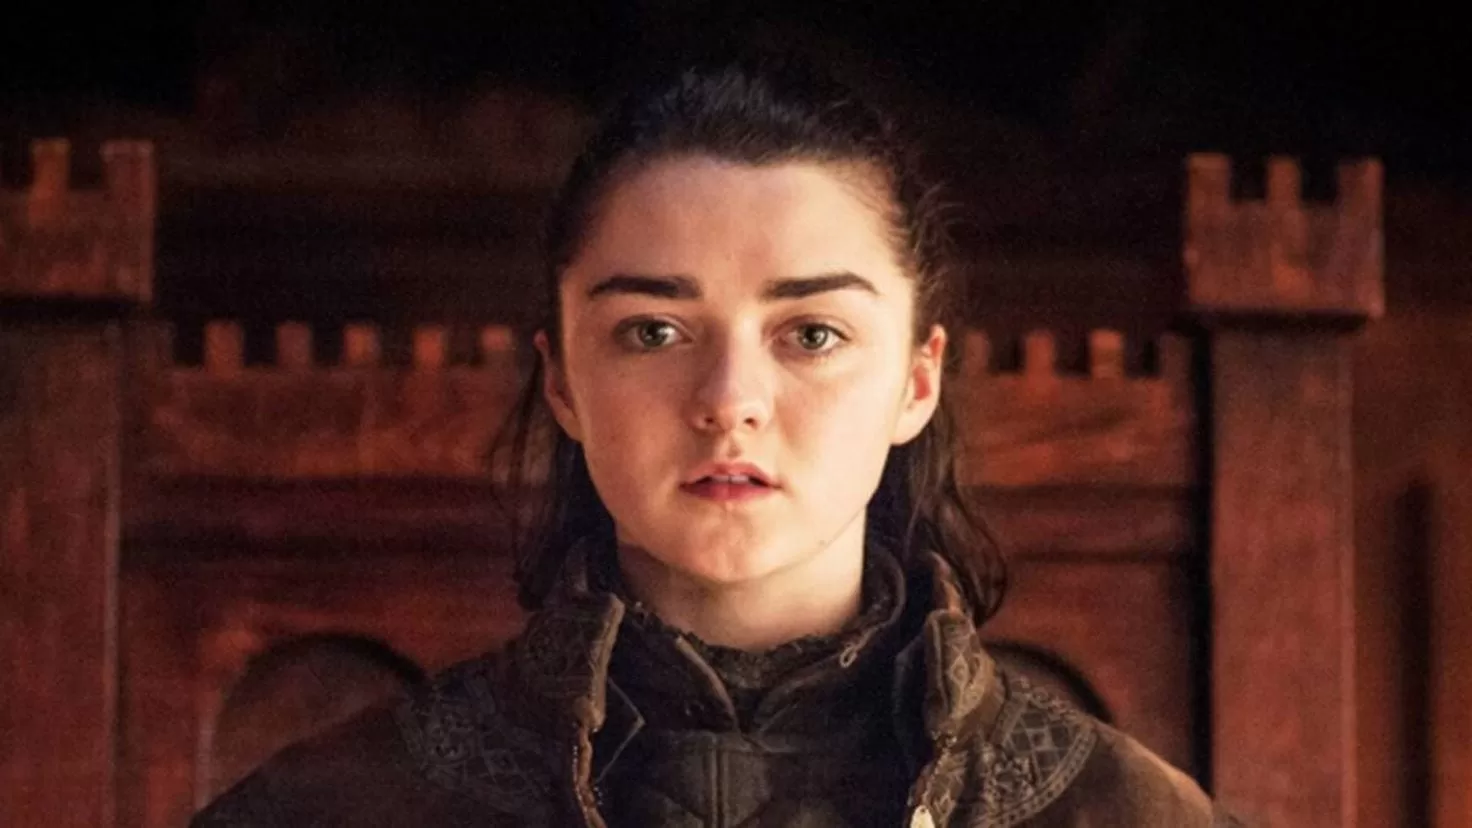 Maisie Williams talks about her beginnings in Game of Thrones: I was lost
